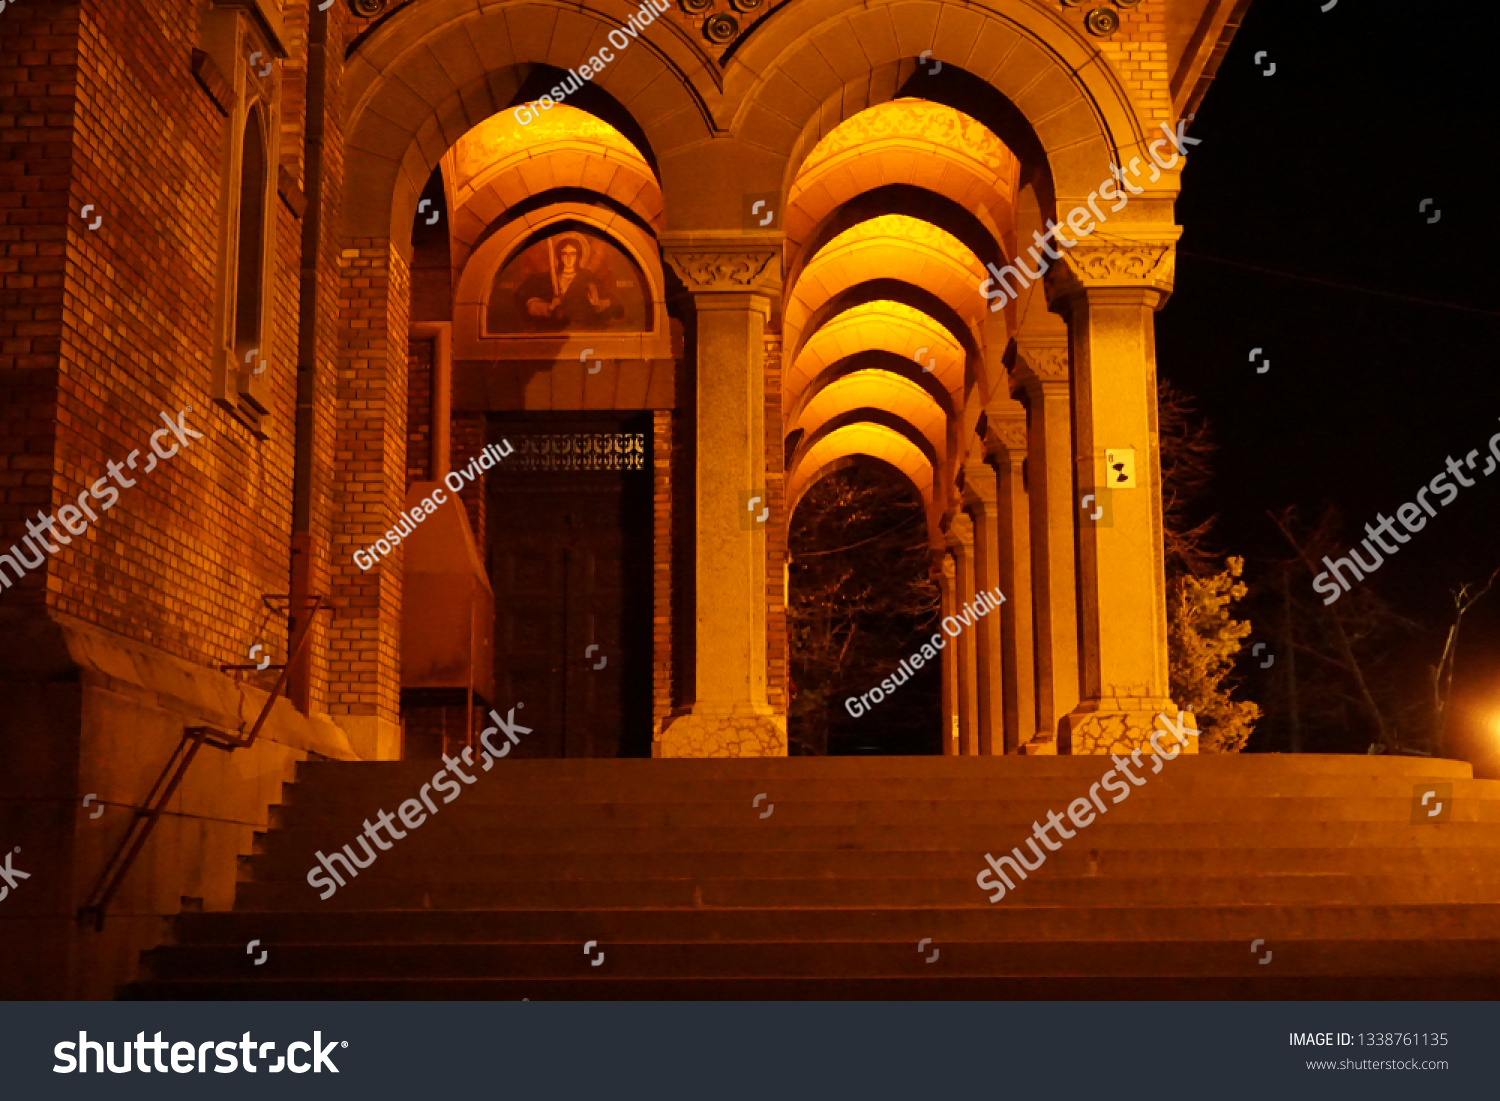 Arched Corridor at a beautiful Cathedral in Eastern Europe night. #1338761135